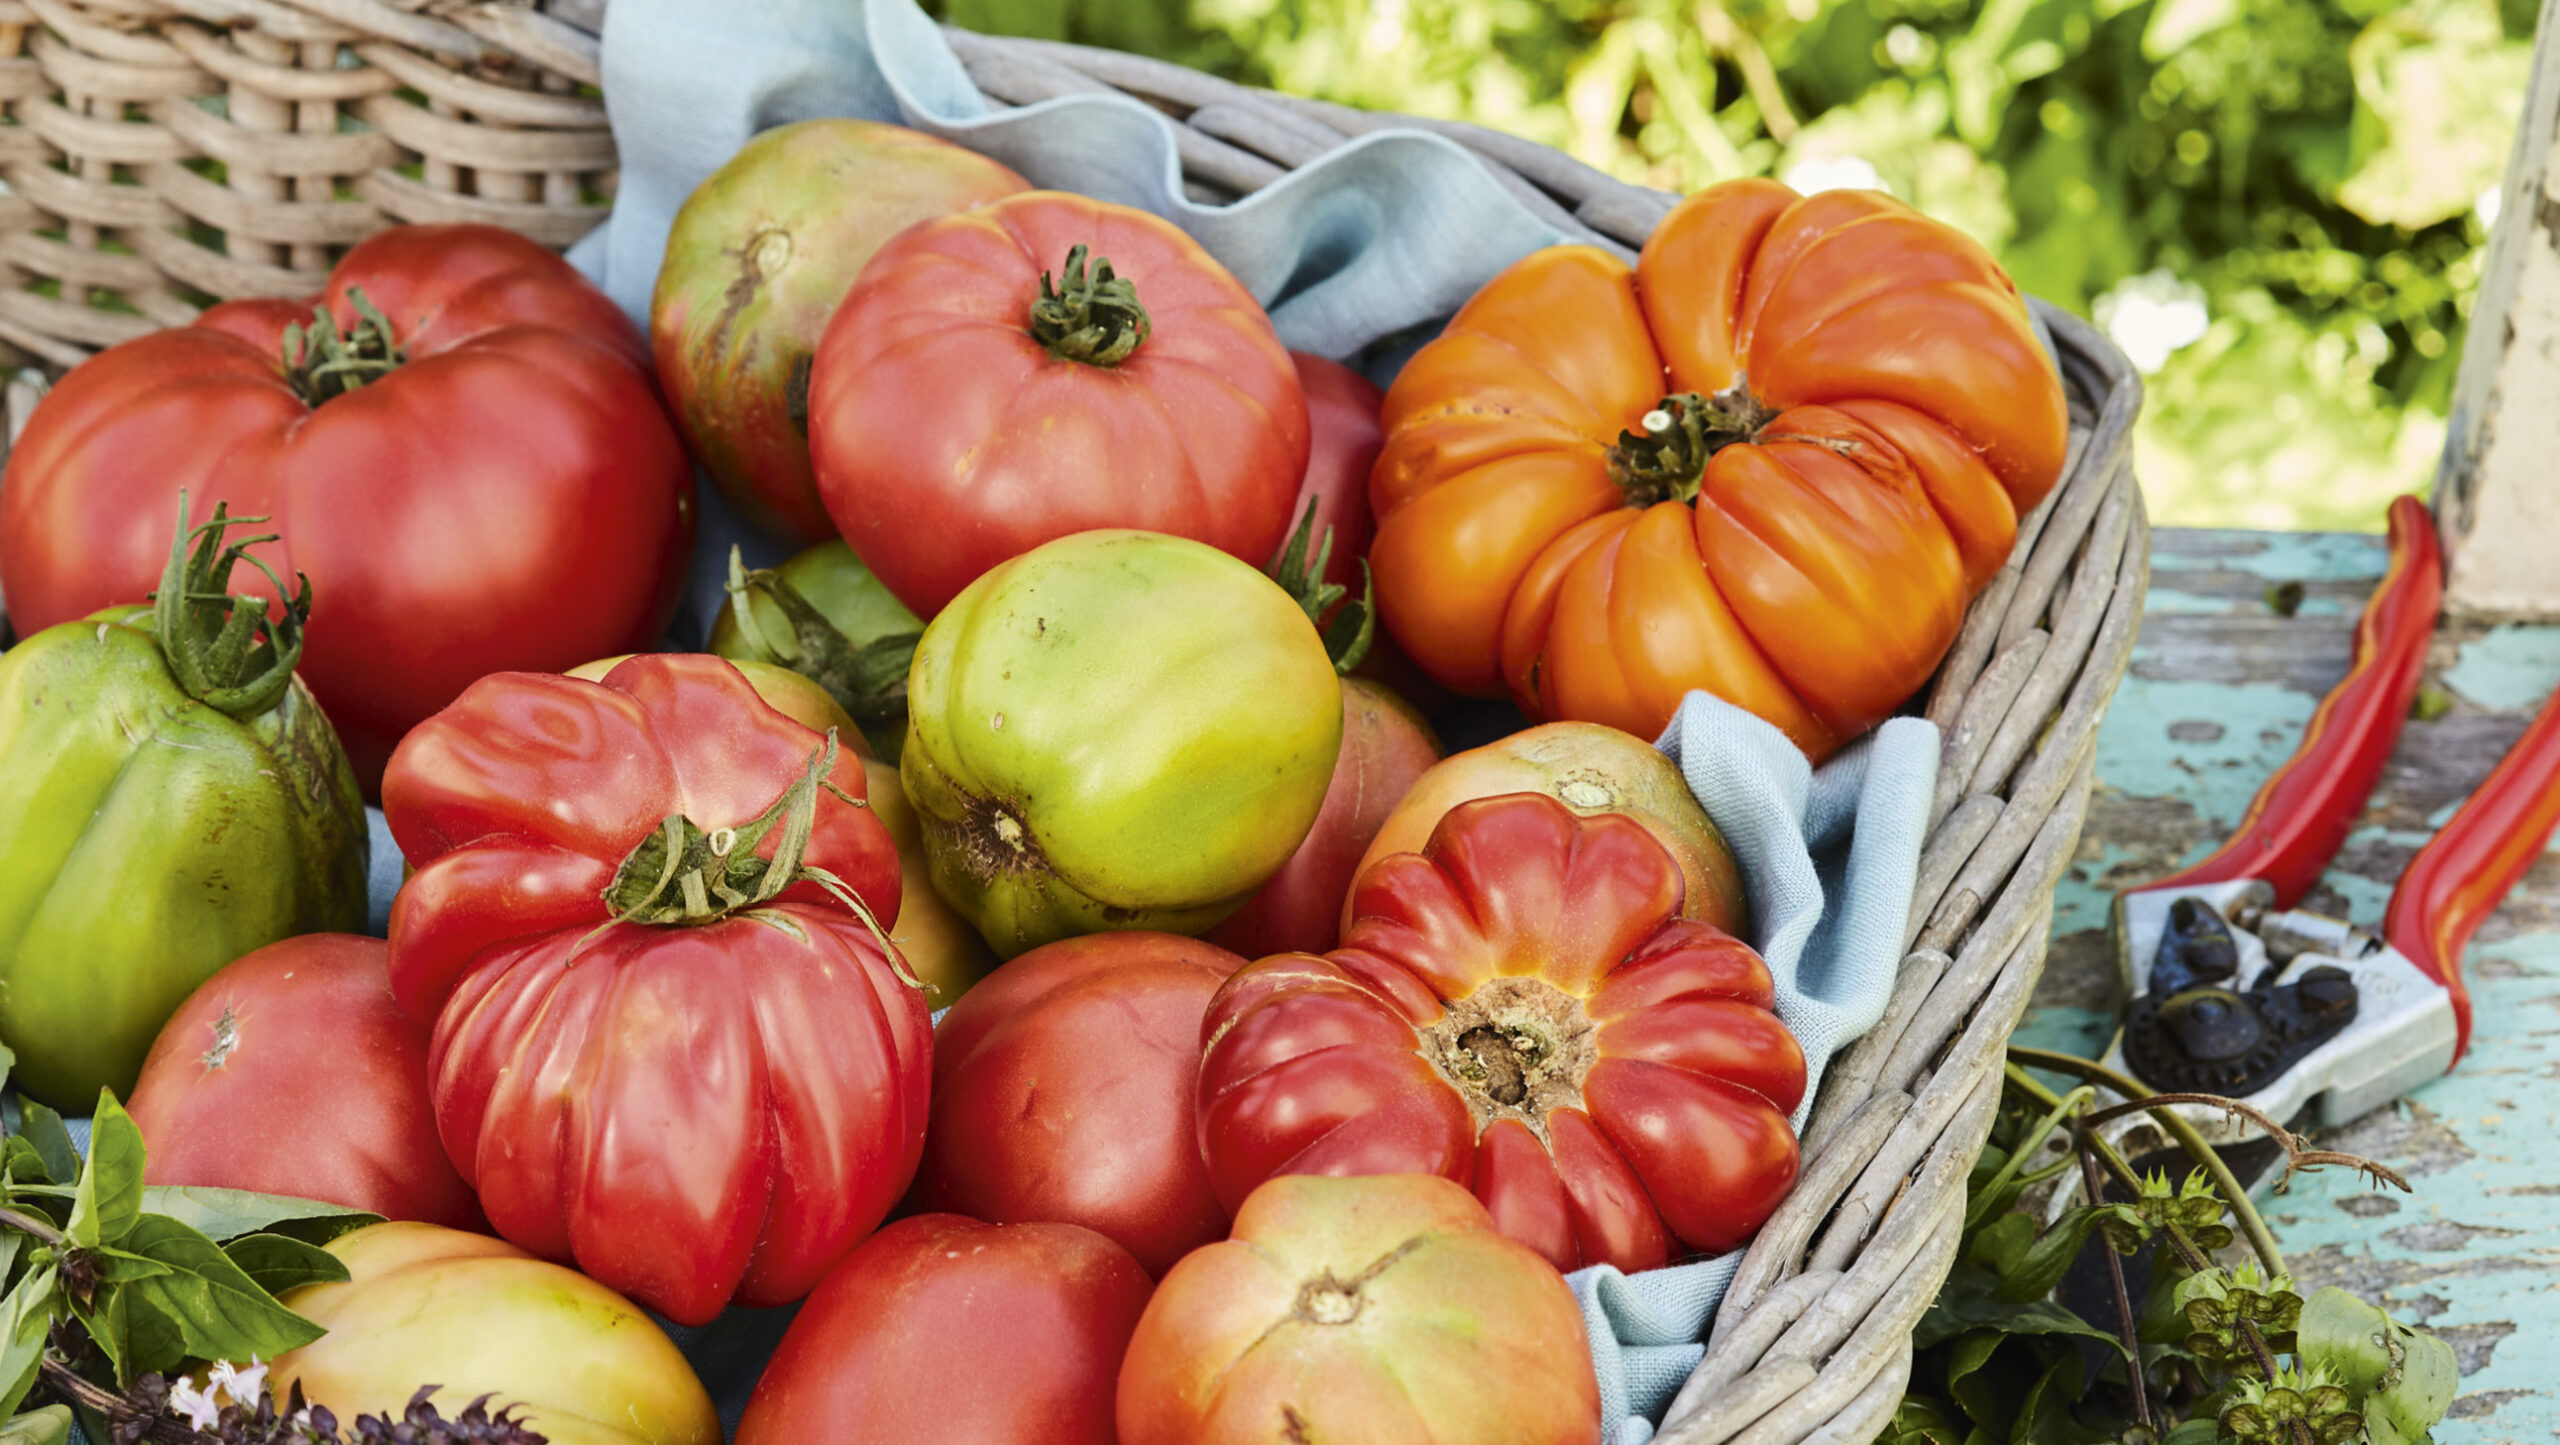 Tomatoes are a favourite here at Organic Gardener!